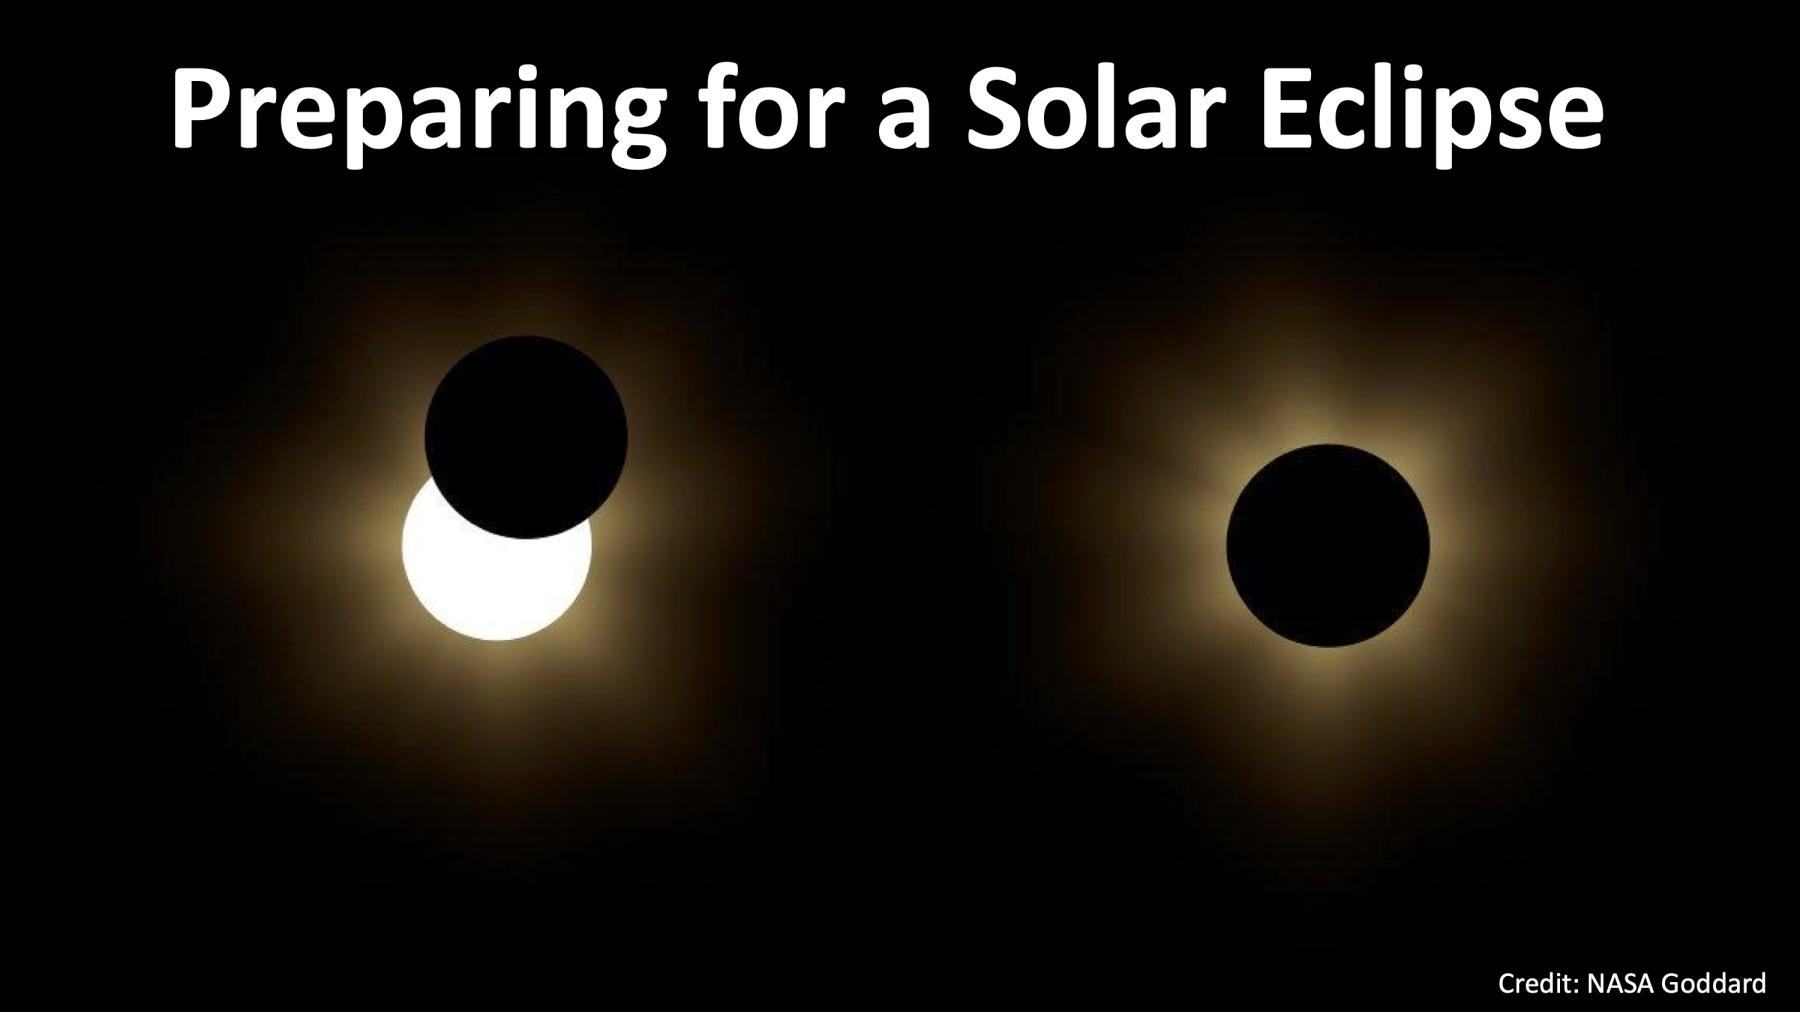 Solar eclipse 2023 slide showing two images from the March 2015 Solar Eclipse; the left image shows a partial solar eclipse and the right shows a total solar eclipse